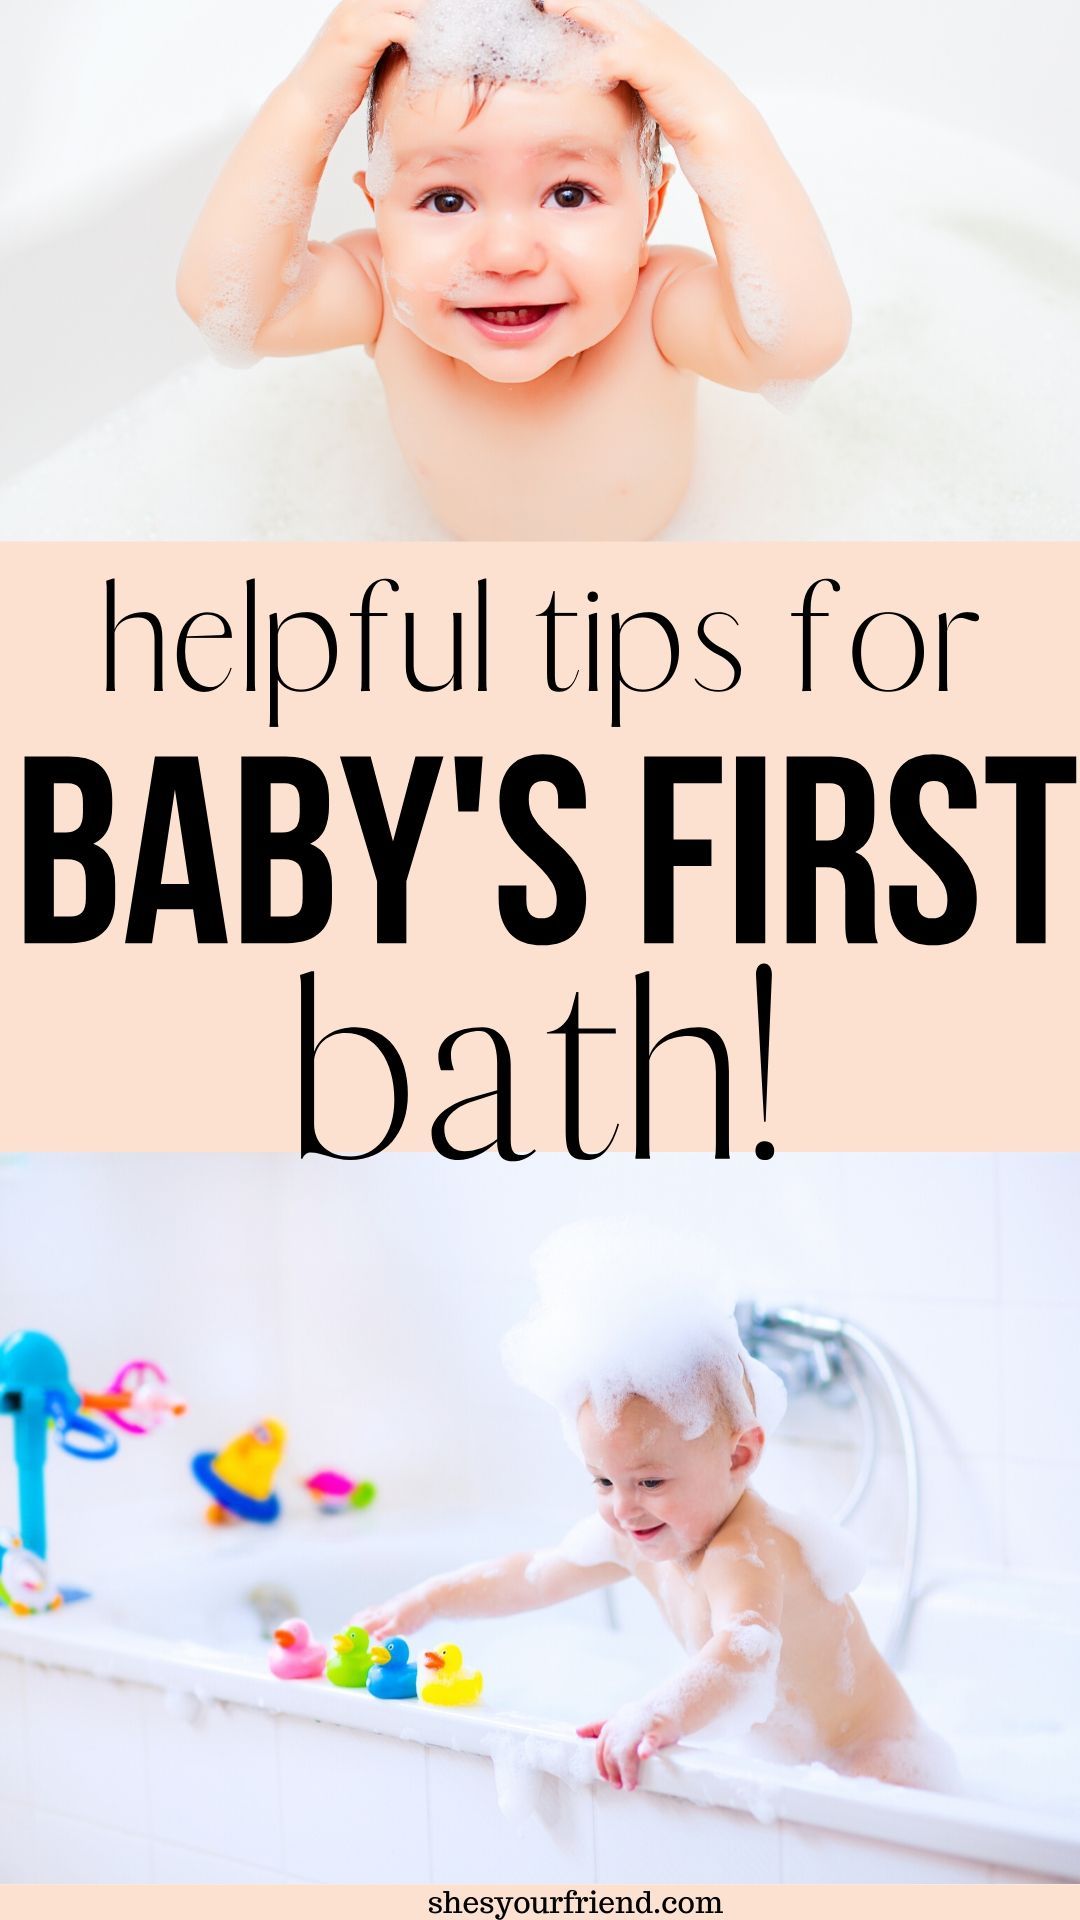 Helpful tips for baby